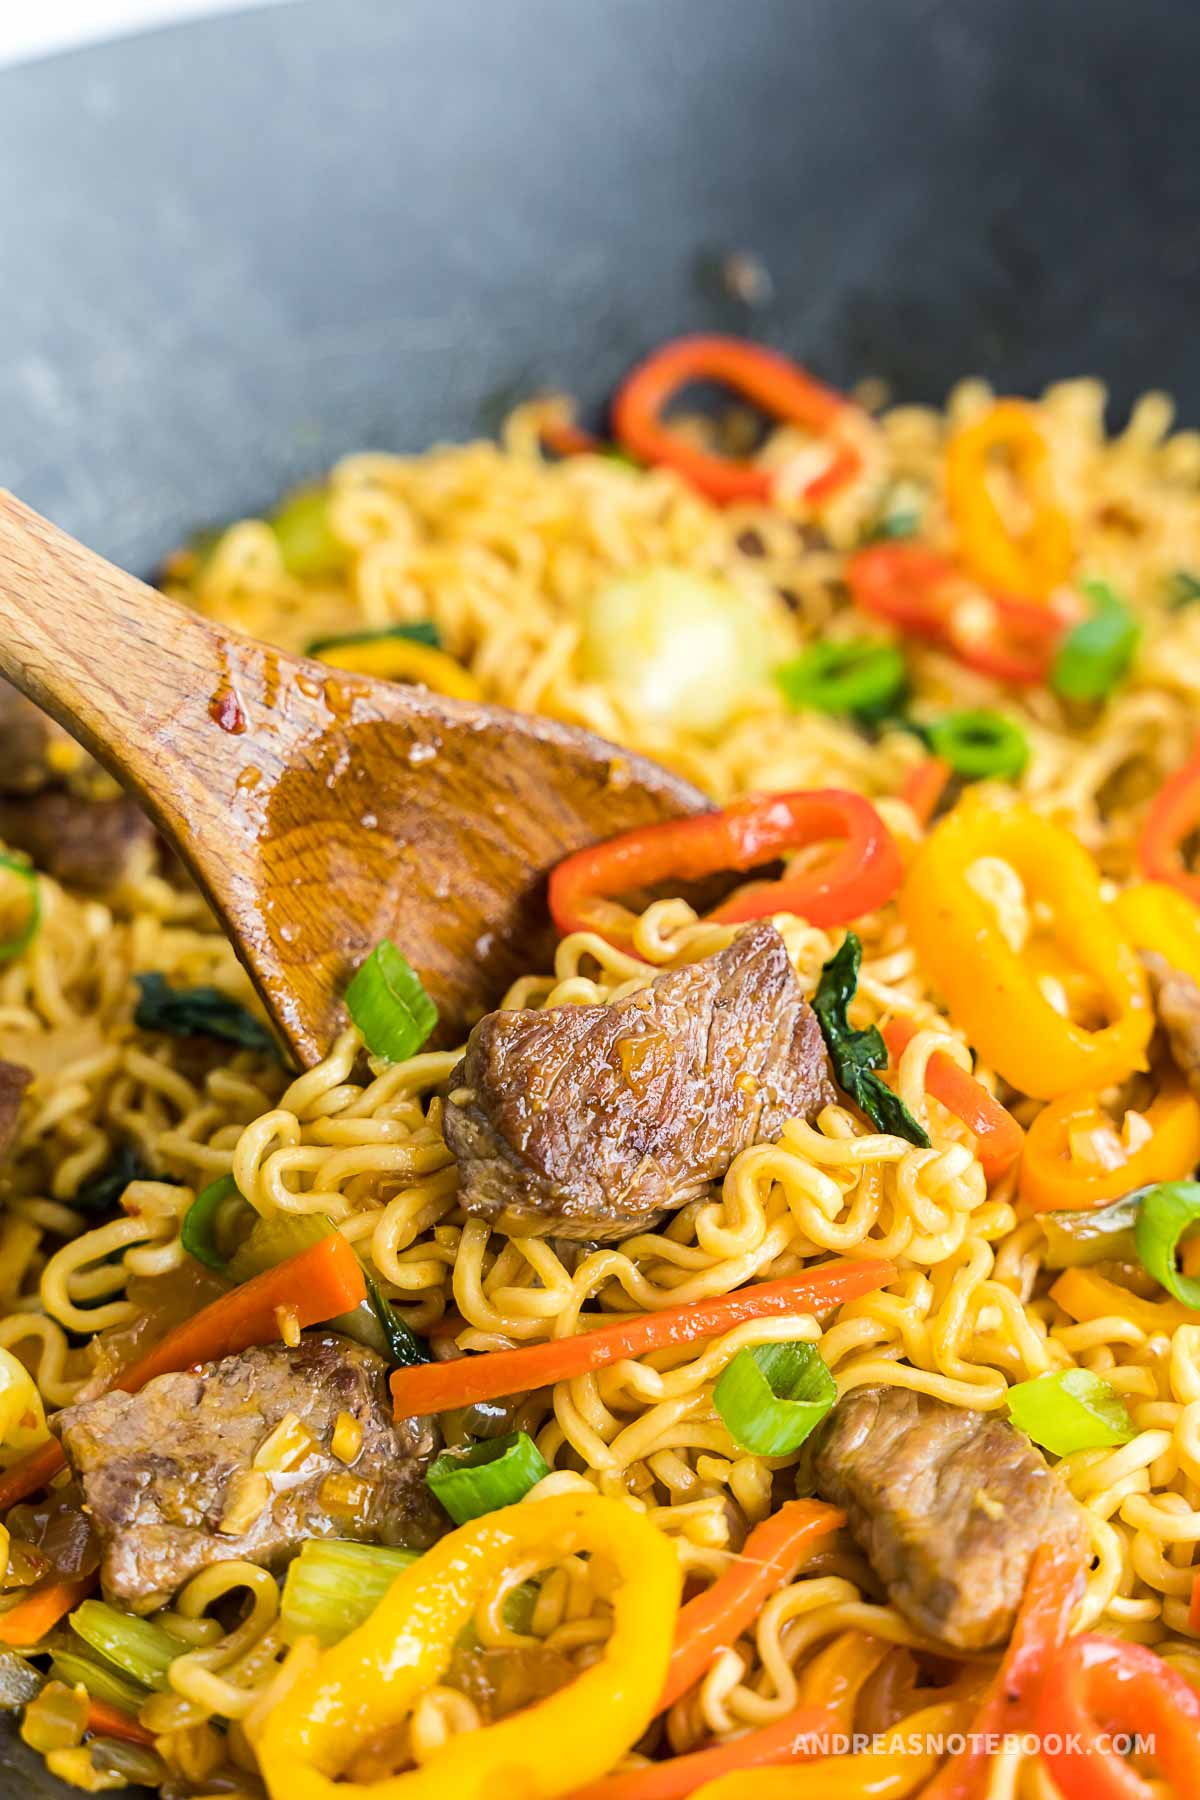 Wok full of spicy beef stir fry with ramen noodles.